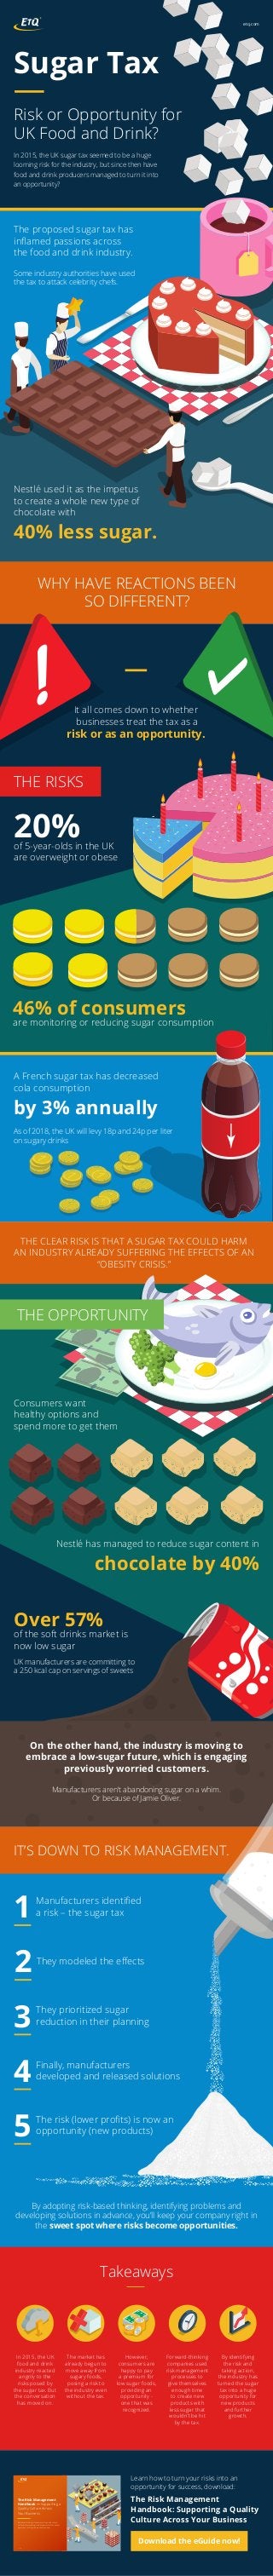 The proposed sugar tax has
inflamed passions across
the food and drink industry.
Some industry authorities have used
the tax to attack celebrity chefs.
In 2015, the UK sugar tax seemed to be a huge
looming risk for the industry, but since then have
food and drink producers managed to turn it into
an opportunity?
Sugar Tax
Risk or Opportunity for
UK Food and Drink?
etq.com
THE RISKS
20%of 5-year-olds in the UK
are overweight or obese
Nestlé used it as the impetus
to create a whole new type of
chocolate with
40% less sugar.
WHY HAVE REACTIONS BEEN
SO DIFFERENT?
It all comes down to whether
businesses treat the tax as a
risk or as an opportunity.
46% of consumers
are monitoring or reducing sugar consumption
A French sugar tax has decreased
cola consumption
by 3% annually
As of 2018, the UK will levy 18p and 24p per liter
on sugary drinks
THE CLEAR RISK IS THAT A SUGAR TAX COULD HARM
AN INDUSTRY ALREADY SUFFERING THE EFFECTS OF AN
“OBESITY CRISIS.”
UK manufacturers are committing to
a 250 kcal cap on servings of sweets
Consumers want
healthy options and
spend more to get them
Nestlé has managed to reduce sugar content in
chocolate by 40%
Over 57%
of the soft drinks market is
now low sugar
On the other hand, the industry is moving to
embrace a low-sugar future, which is engaging
previously worried customers.
Manufacturers aren’t abandoning sugar on a whim.
Or because of Jamie Oliver.
THE OPPORTUNITY
IT’S DOWN TO RISK MANAGEMENT.
1 Manufacturers identified
a risk – the sugar tax
3 They prioritized sugar
reduction in their planning
4 Finally, manufacturers
developed and released solutions
5 The risk (lower profits) is now an
opportunity (new products)
2 They modeled the effects
By adopting risk-based thinking, identifying problems and
developing solutions in advance, you’ll keep your company right in
the sweet spot where risks become opportunities.
Learn how to turn your risks into an
opportunity for success, download:
The Risk Management
Handbook: Supporting a Quality
Culture Across Your Business
etq.com
The Risk Management
Handbook — Supporting a
Quality Culture Across
Your Business
Risk-based thinking is fundamental to quality culture,
and involves extending risk management across all your
operations. In this guide, we show you how.
Takeaways
In 2015, the UK
food and drink
industry reacted
angrily to the
risks posed by
the sugar tax. But
the conversation
has moved on.
The market has
already begun to
move away from
sugary foods,
posing a risk to
the industry even
without the tax.
However,
consumers are
happy to pay
a premium for
low sugar foods,
providing an
opportunity -
one that was
recognized.
Forward-thinking
companies used
risk management
processes to
give themselves
enough time
to create new
products with
less sugar that
wouldn’t be hit
by the tax.
By identifying
the risk and
taking action,
the industry has
turned the sugar
tax into a huge
opportunity for
new products
and further
growth.
Download the eGuide now!
 